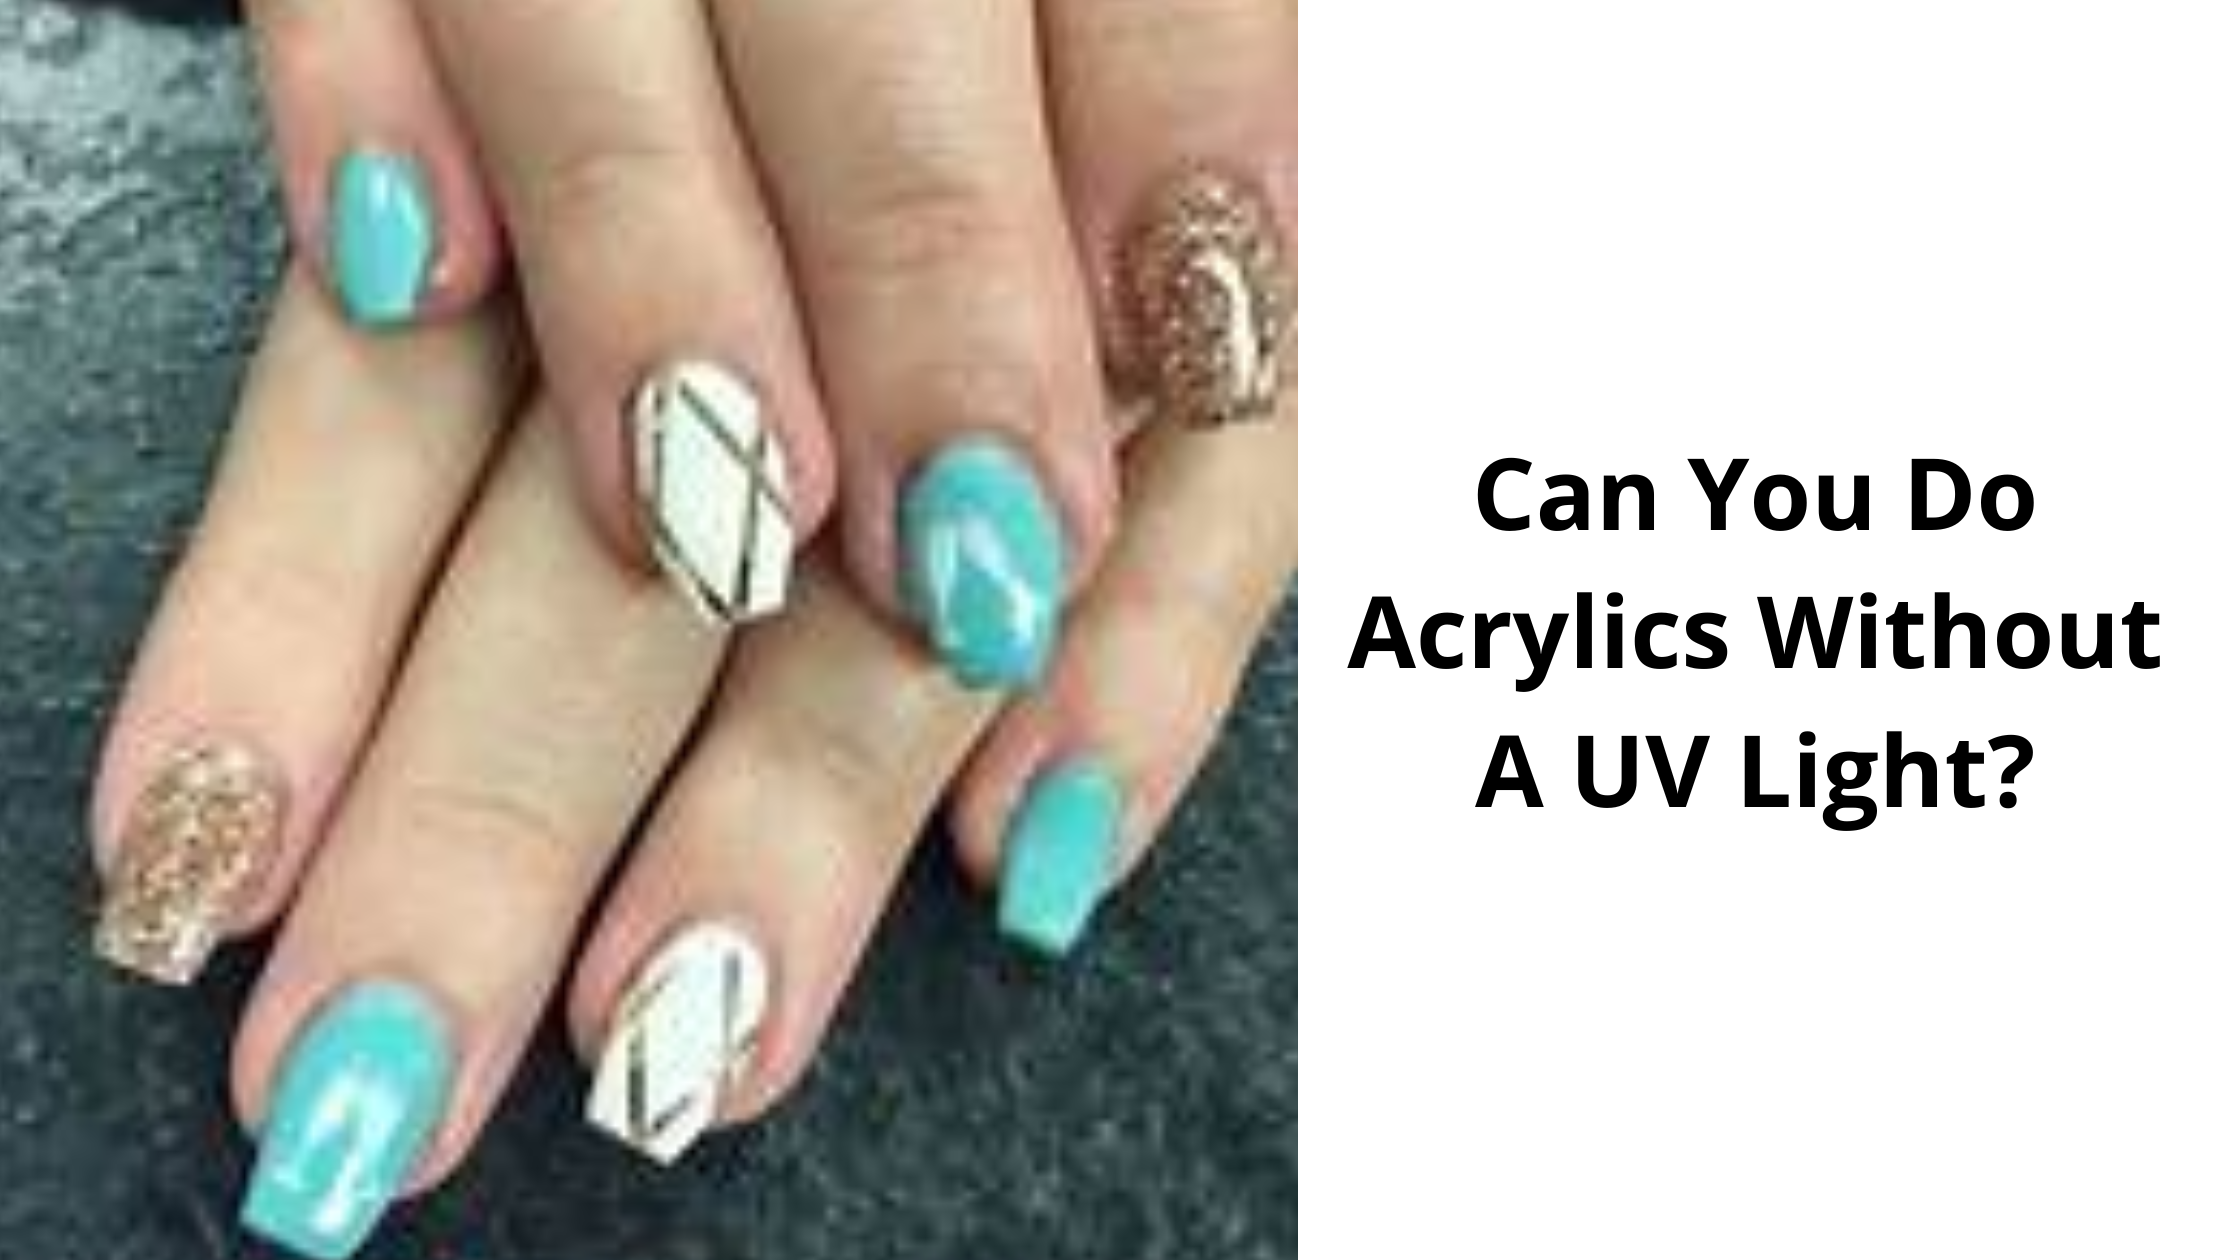 Can You Do Acrylics Without A UV Light?